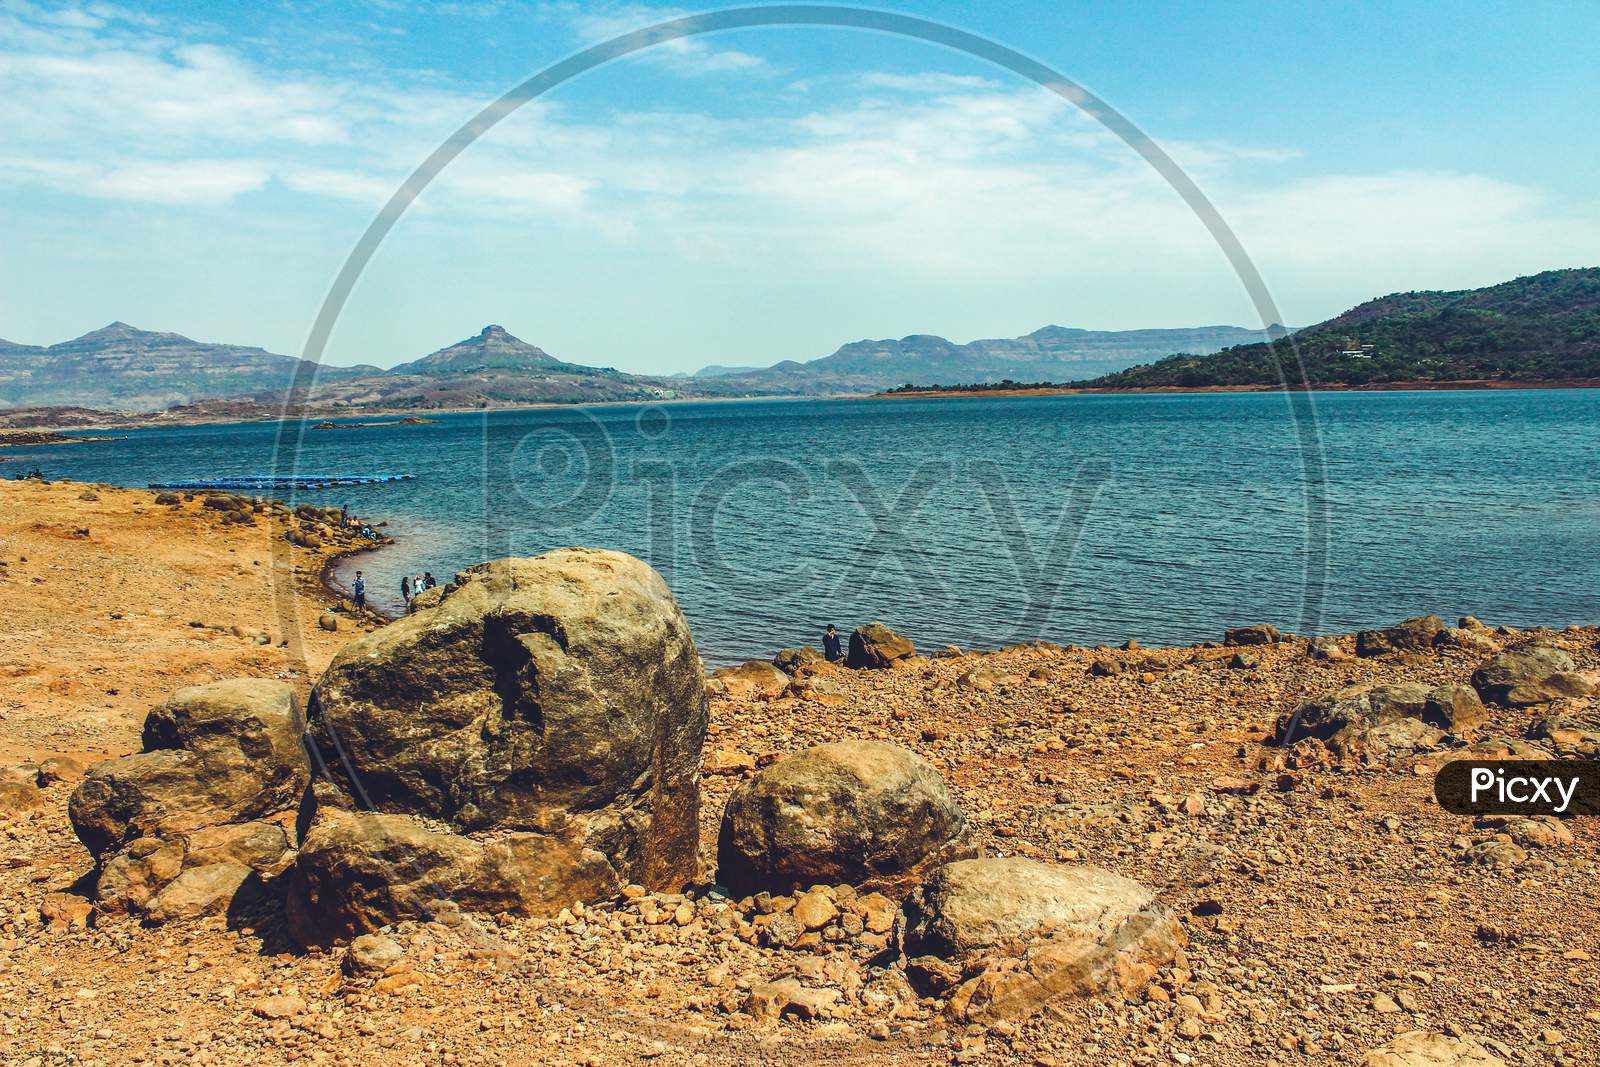 Landscape Of A Lake From Its Rocky Shore With Mountains In The Background